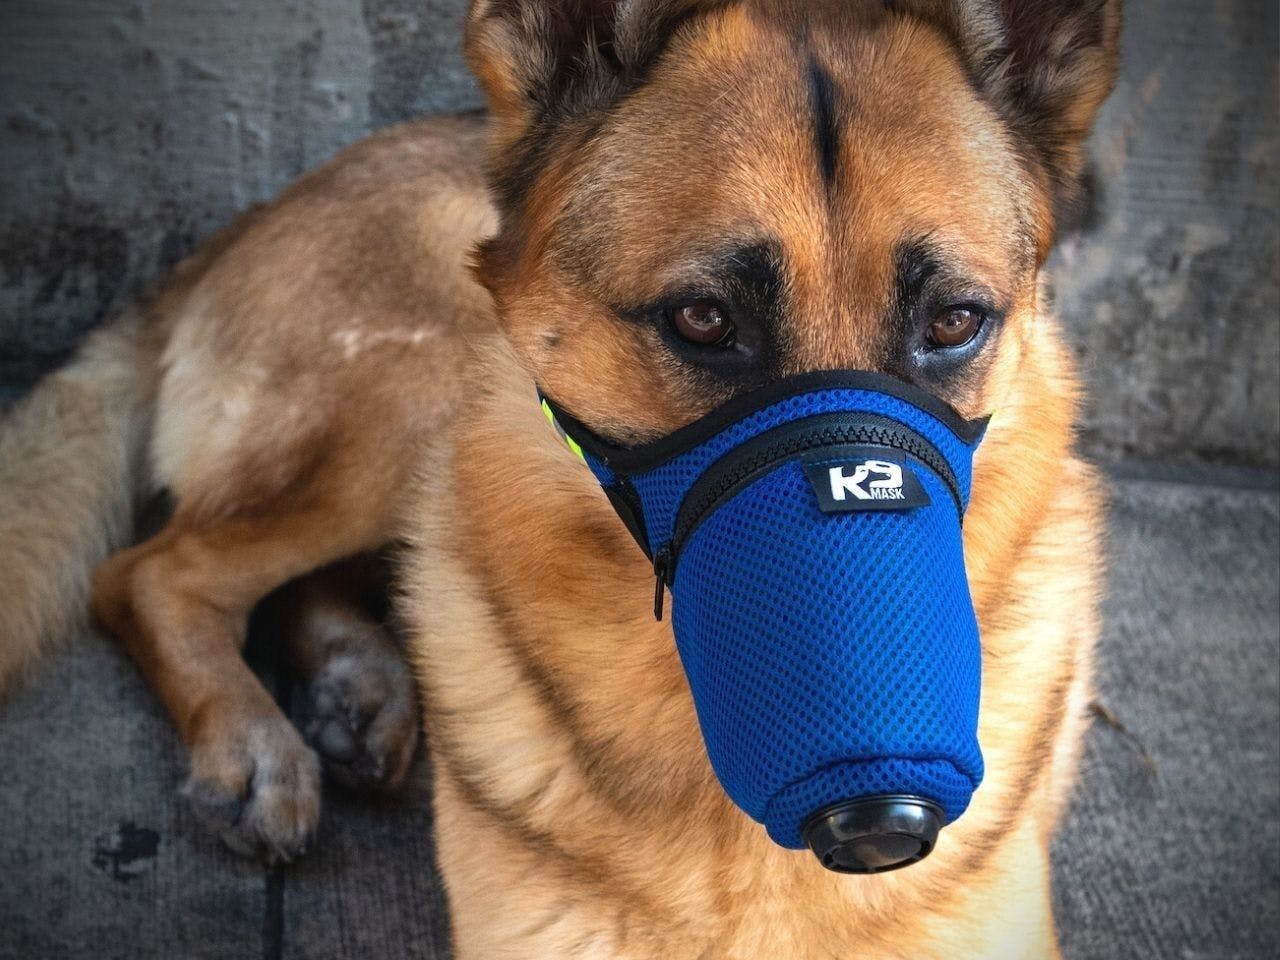 K9 Mask dog air filters offer new way to protect K9 police dogs from fentanyl opioid inhalation and overdose (Image courtesy of Good Air Team LLC). 